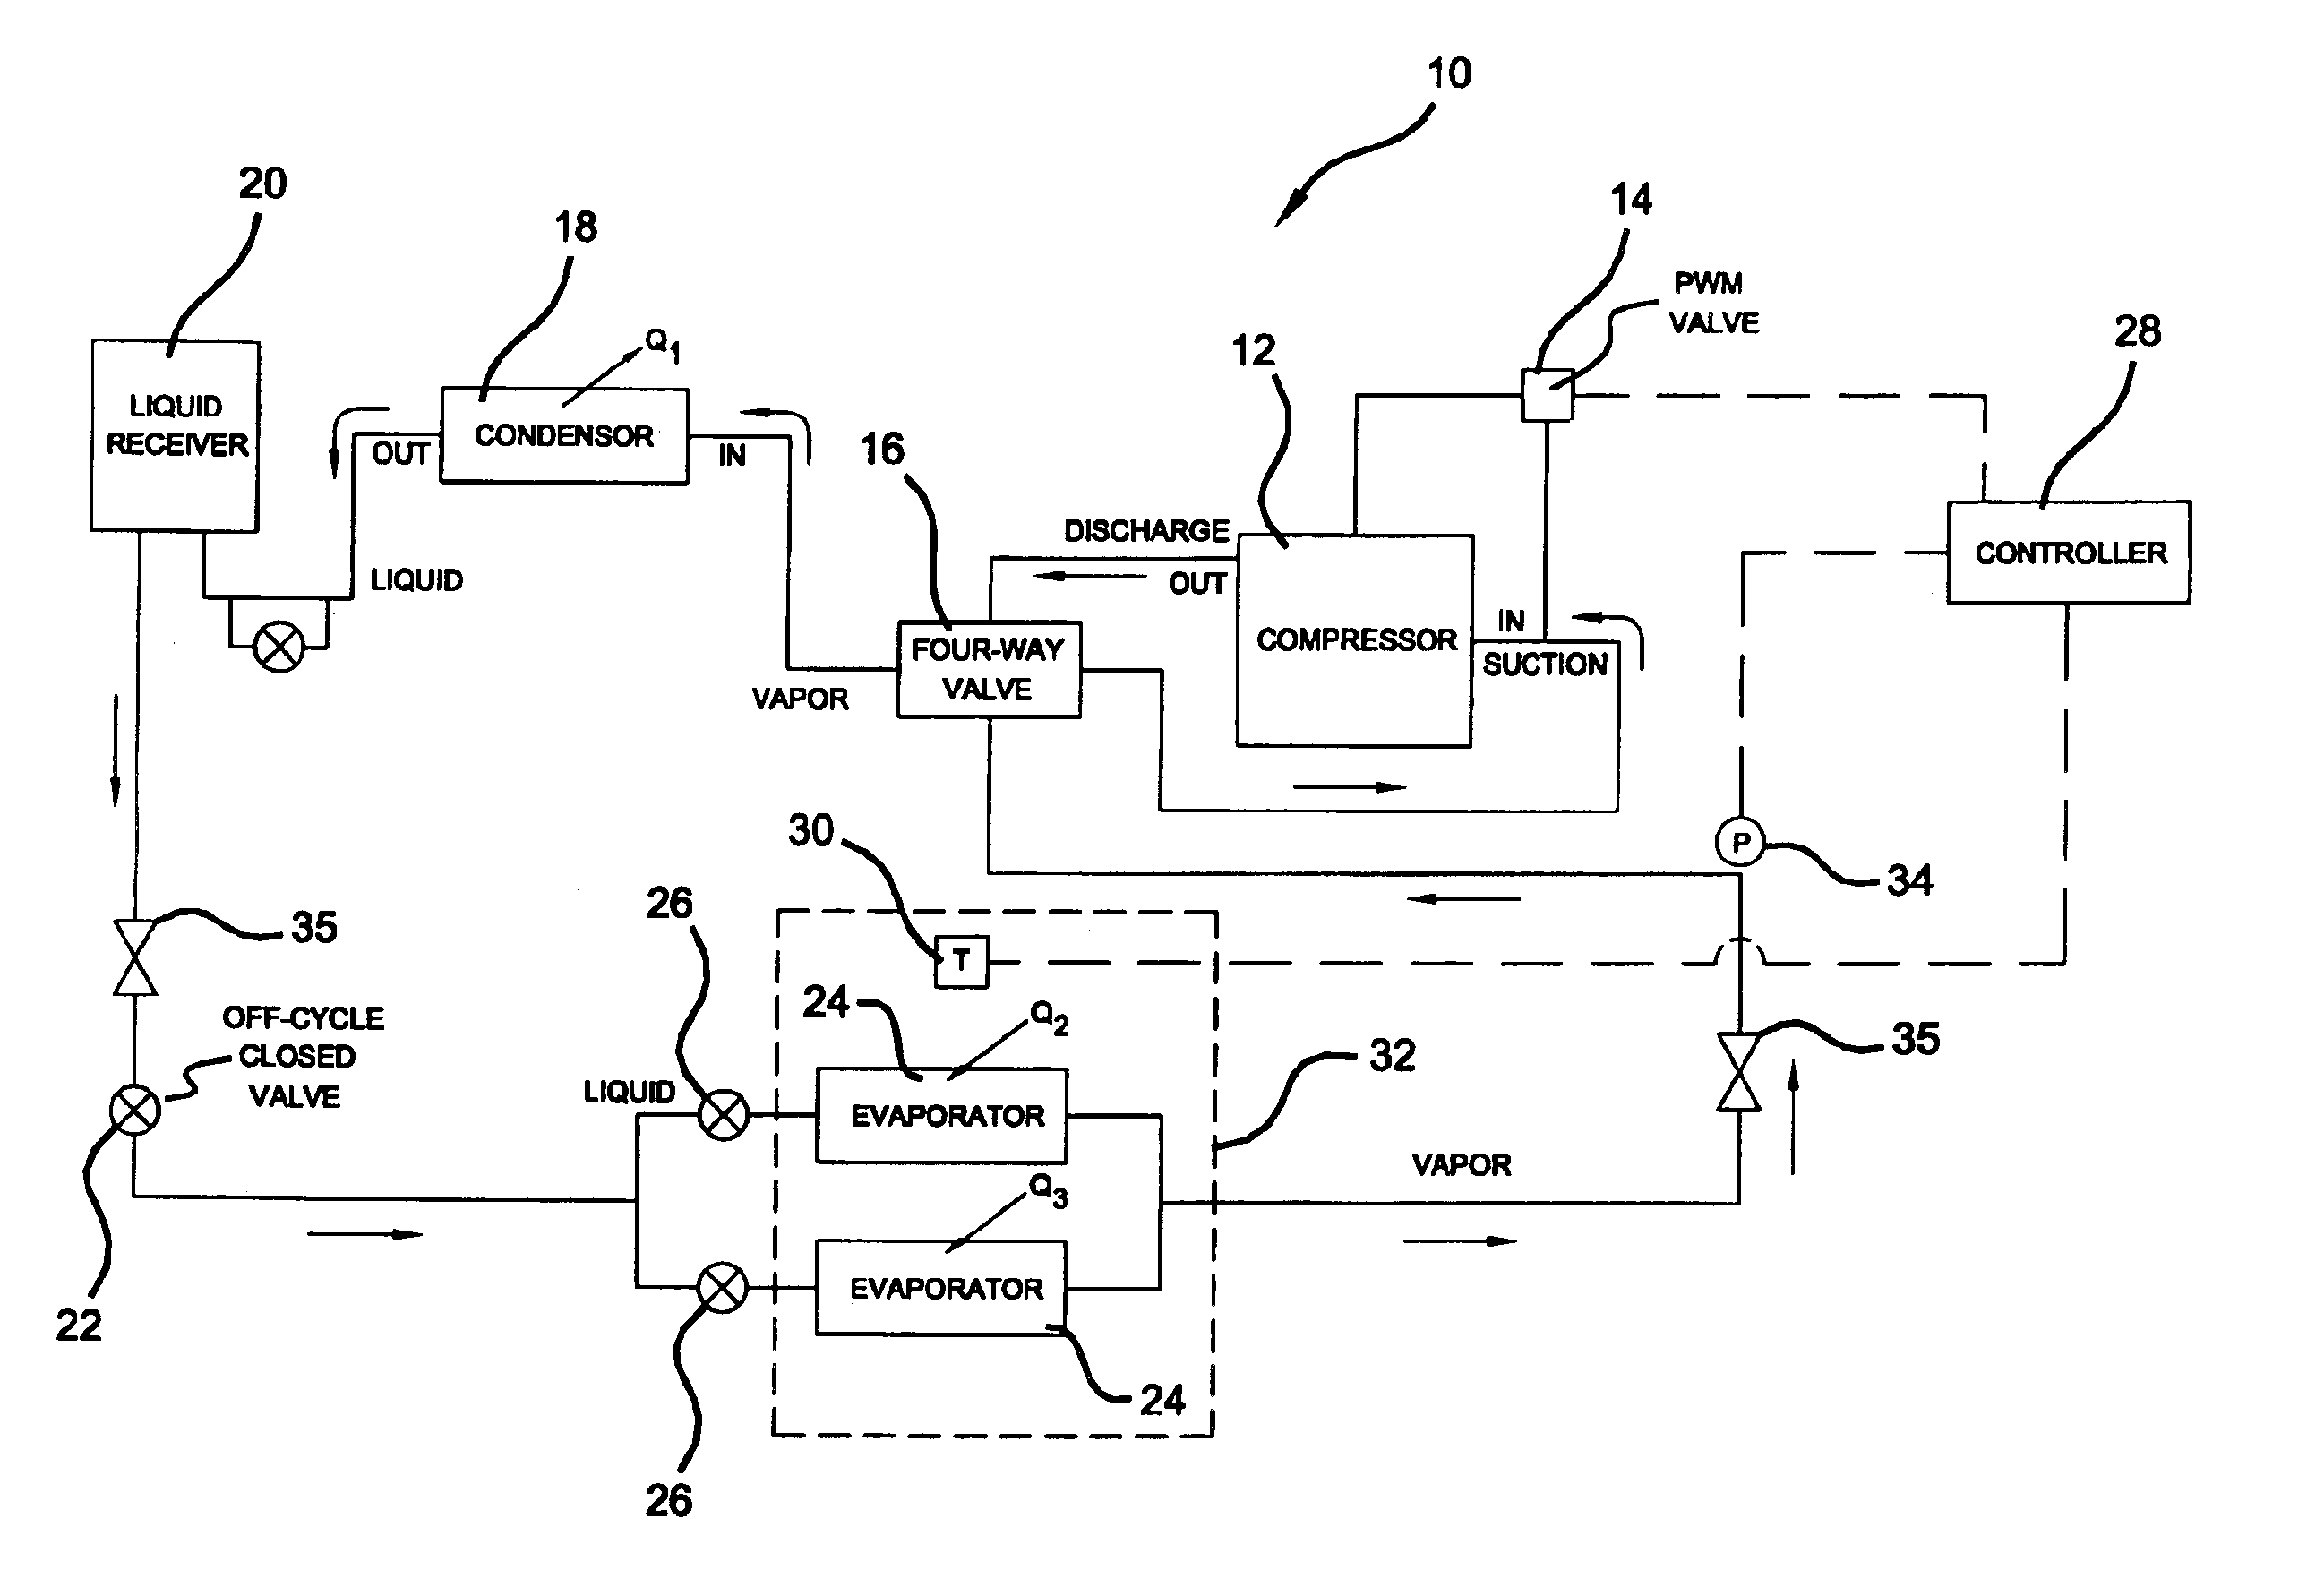 Cooling system with isolation valve